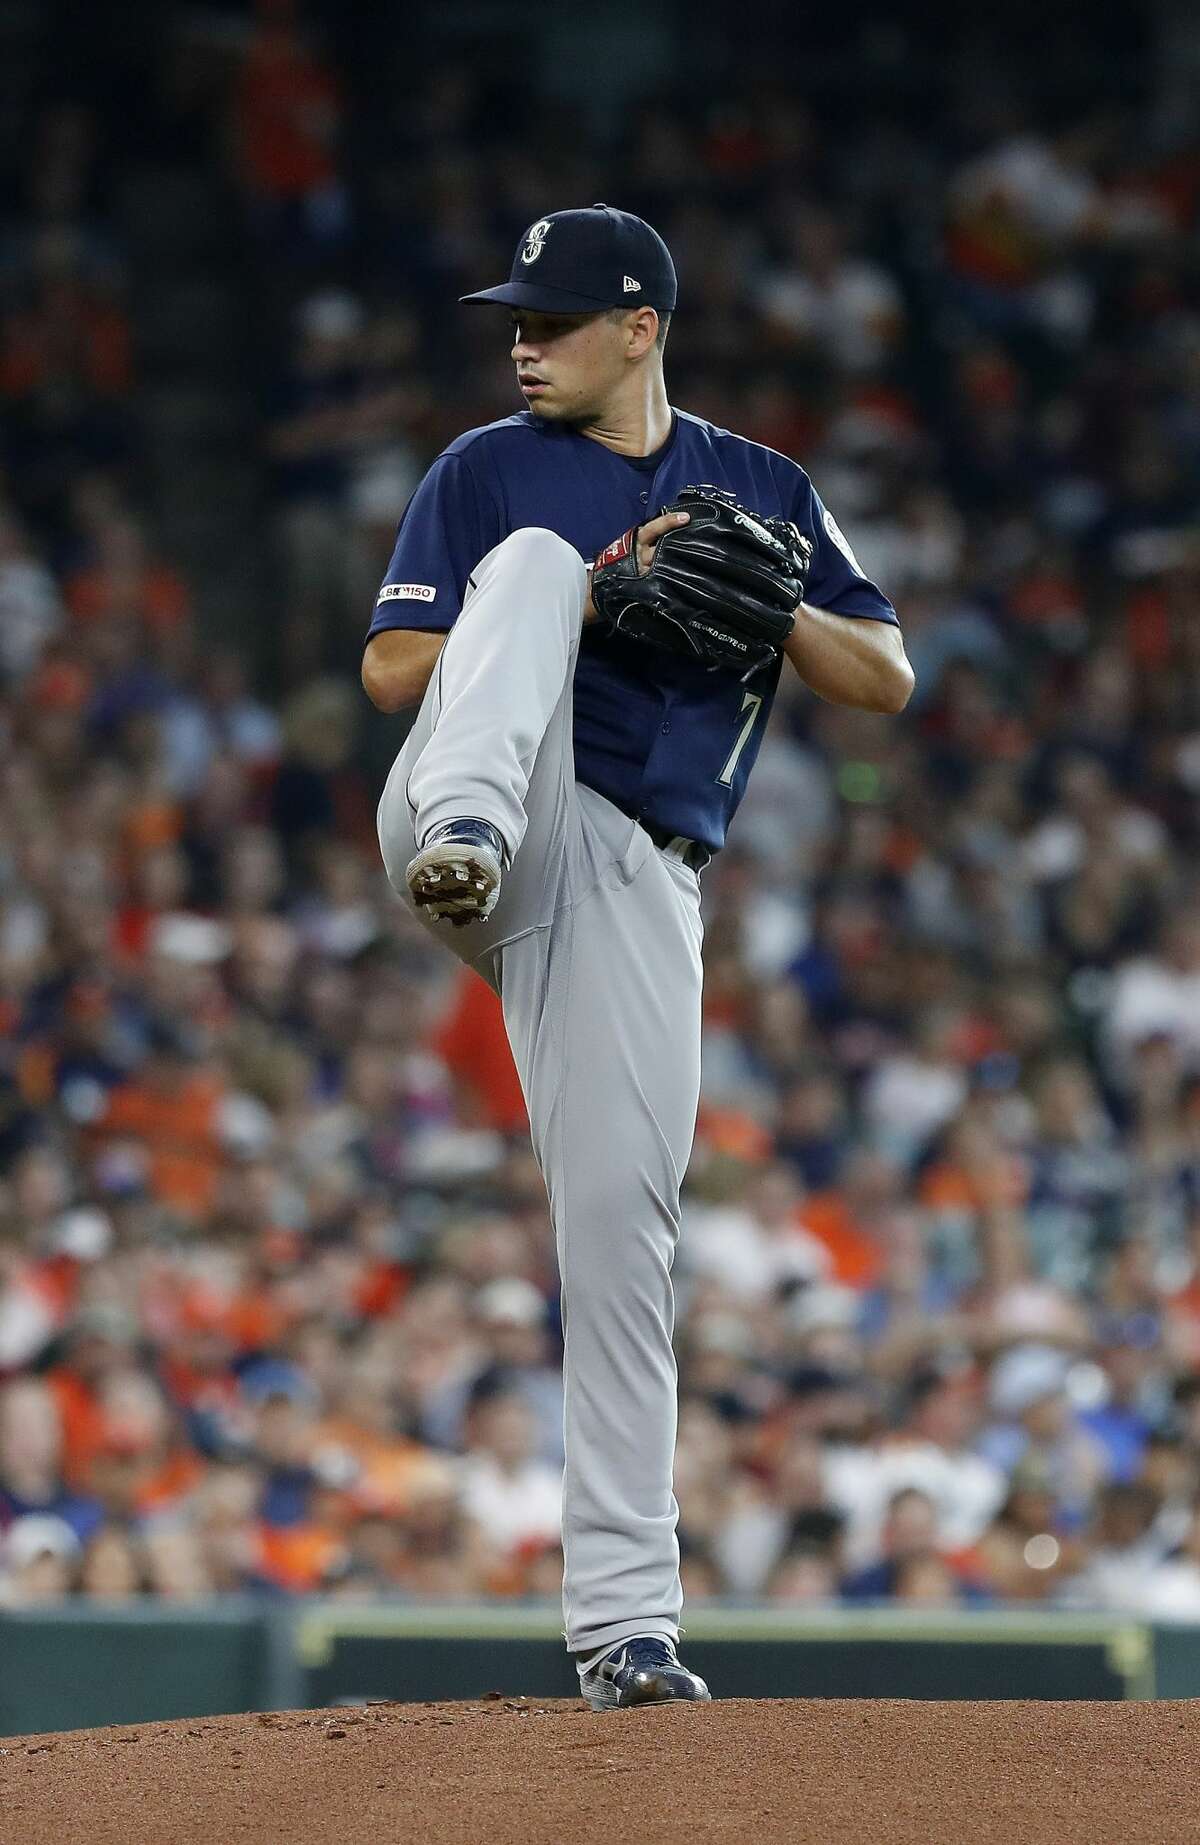 Seattle Mariners starting pitcher Marco Gonzales (7) pitches during the first innning of an MLB game at Minute Maid Park, Sunday, August 3, 2019.